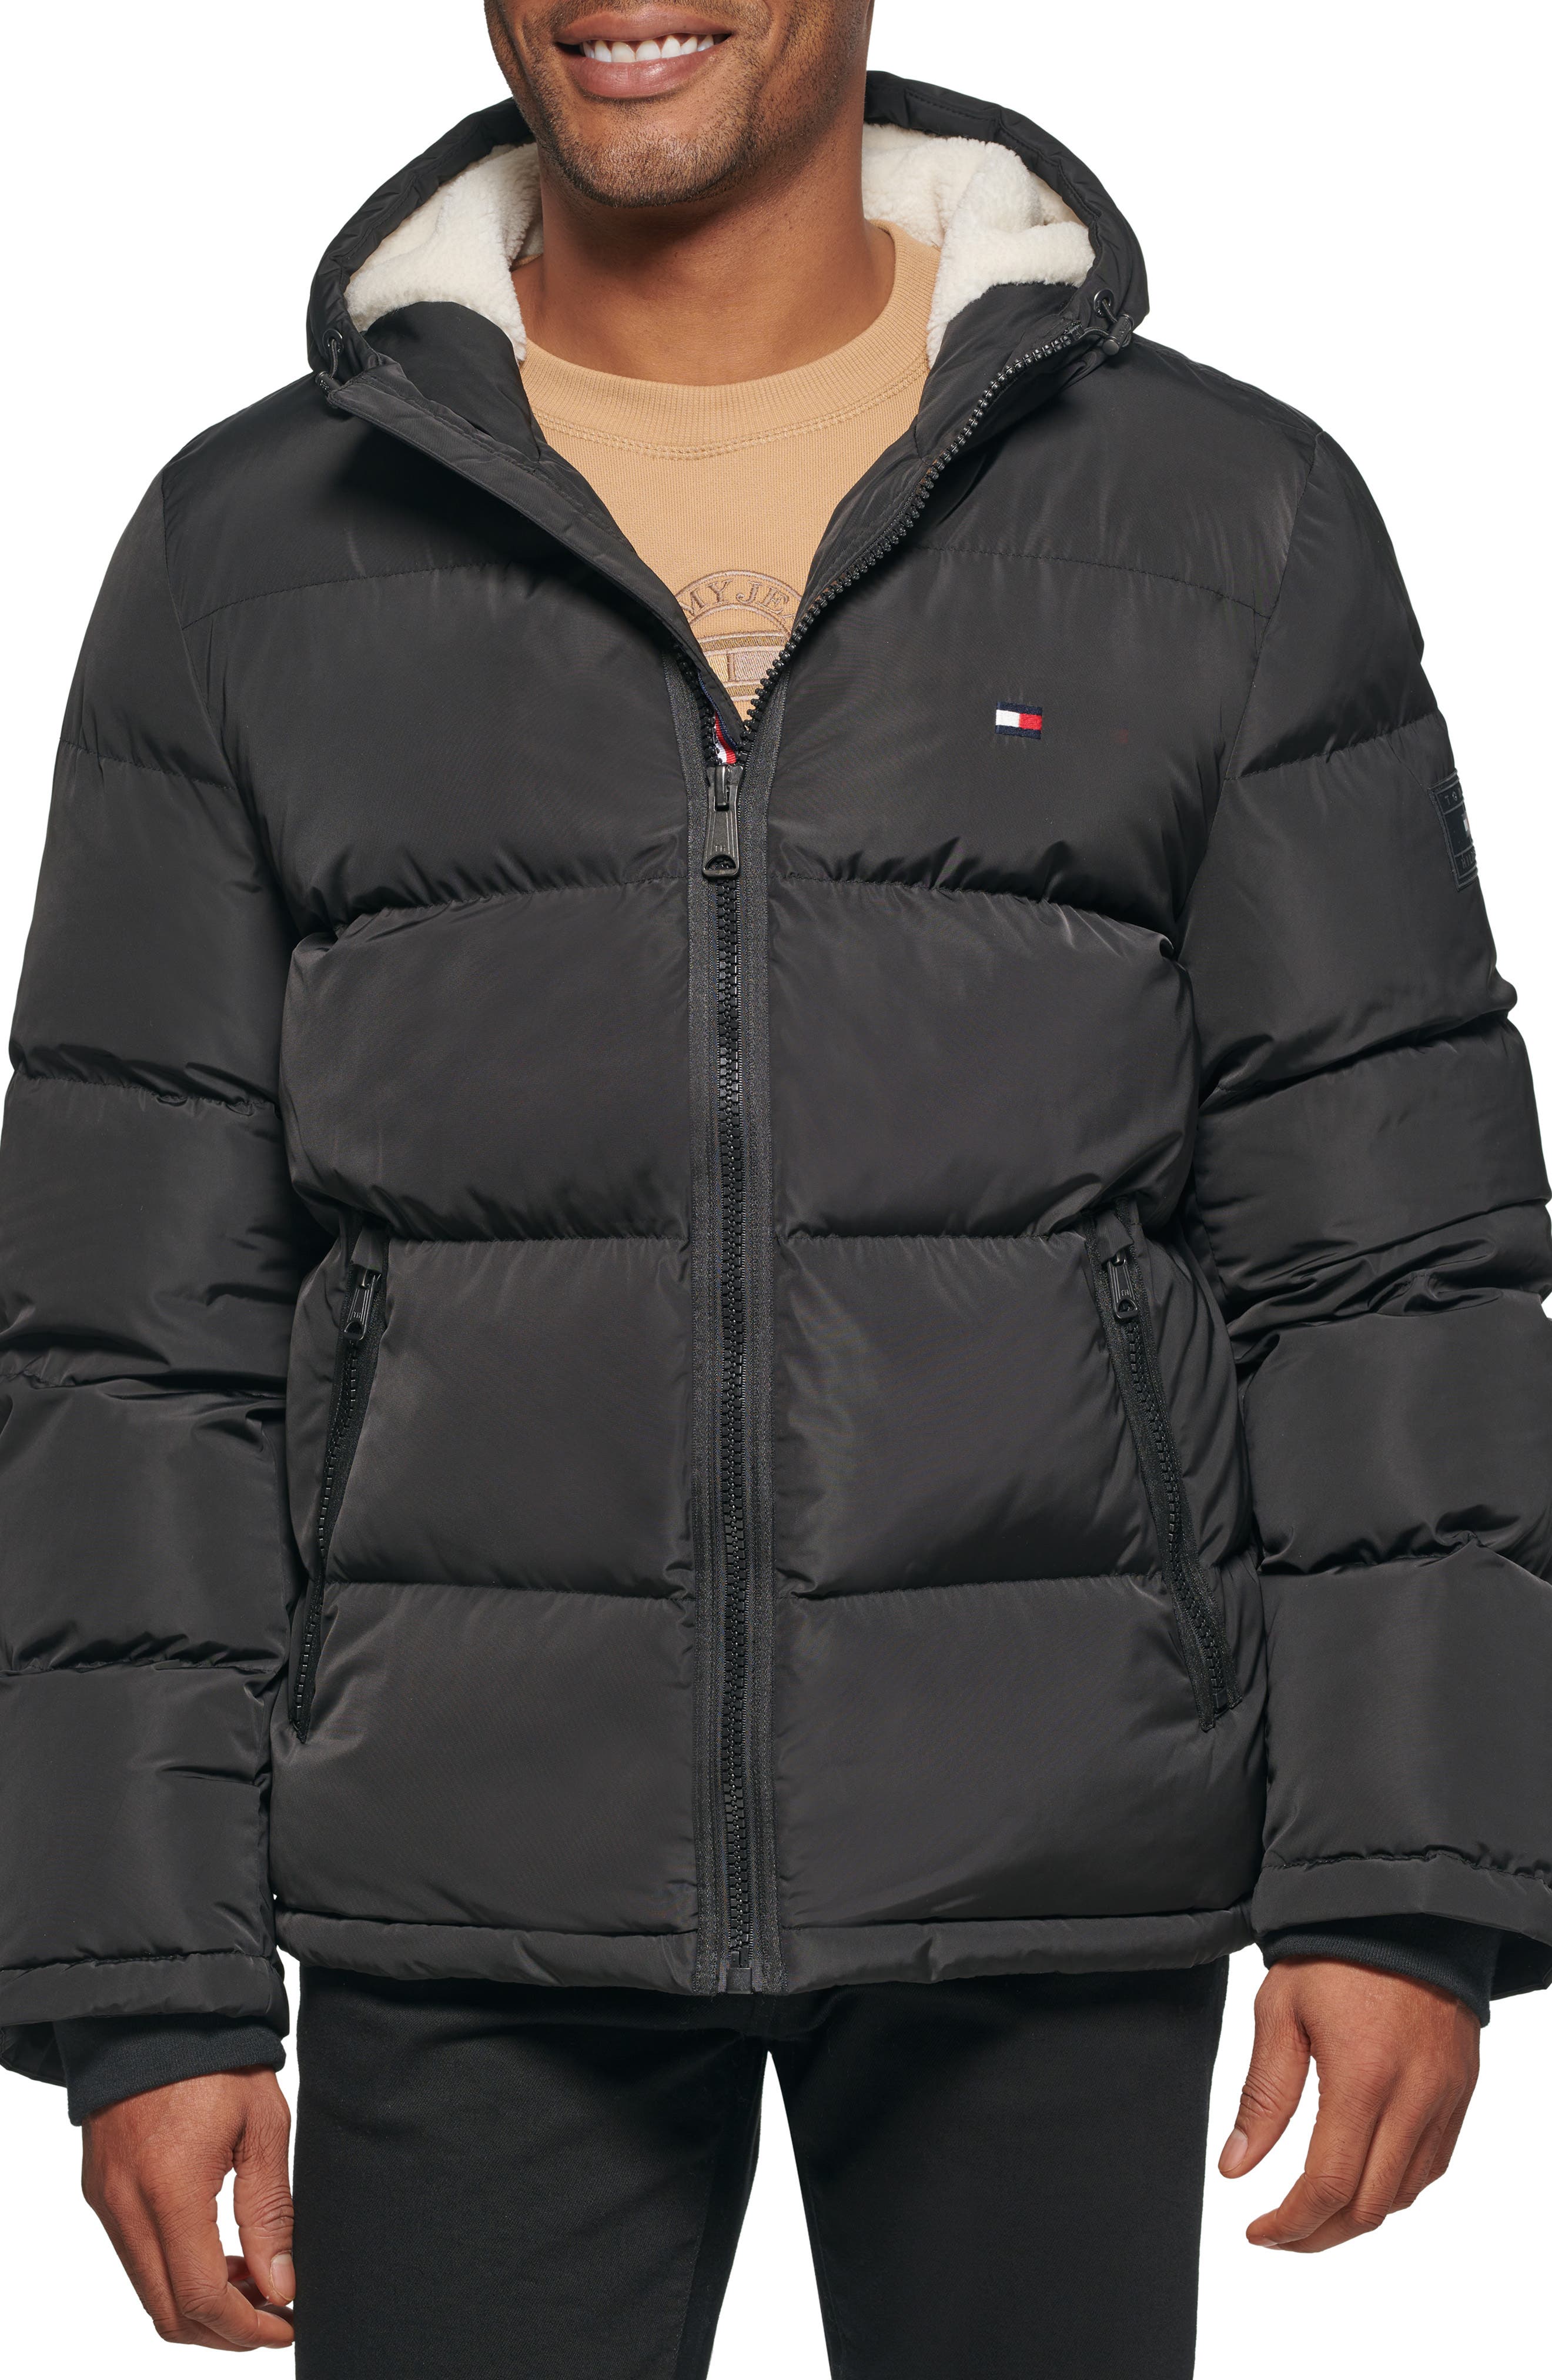 IZOD Men's Big & Tall Insulated Puffer Jacket with Removable Hood 